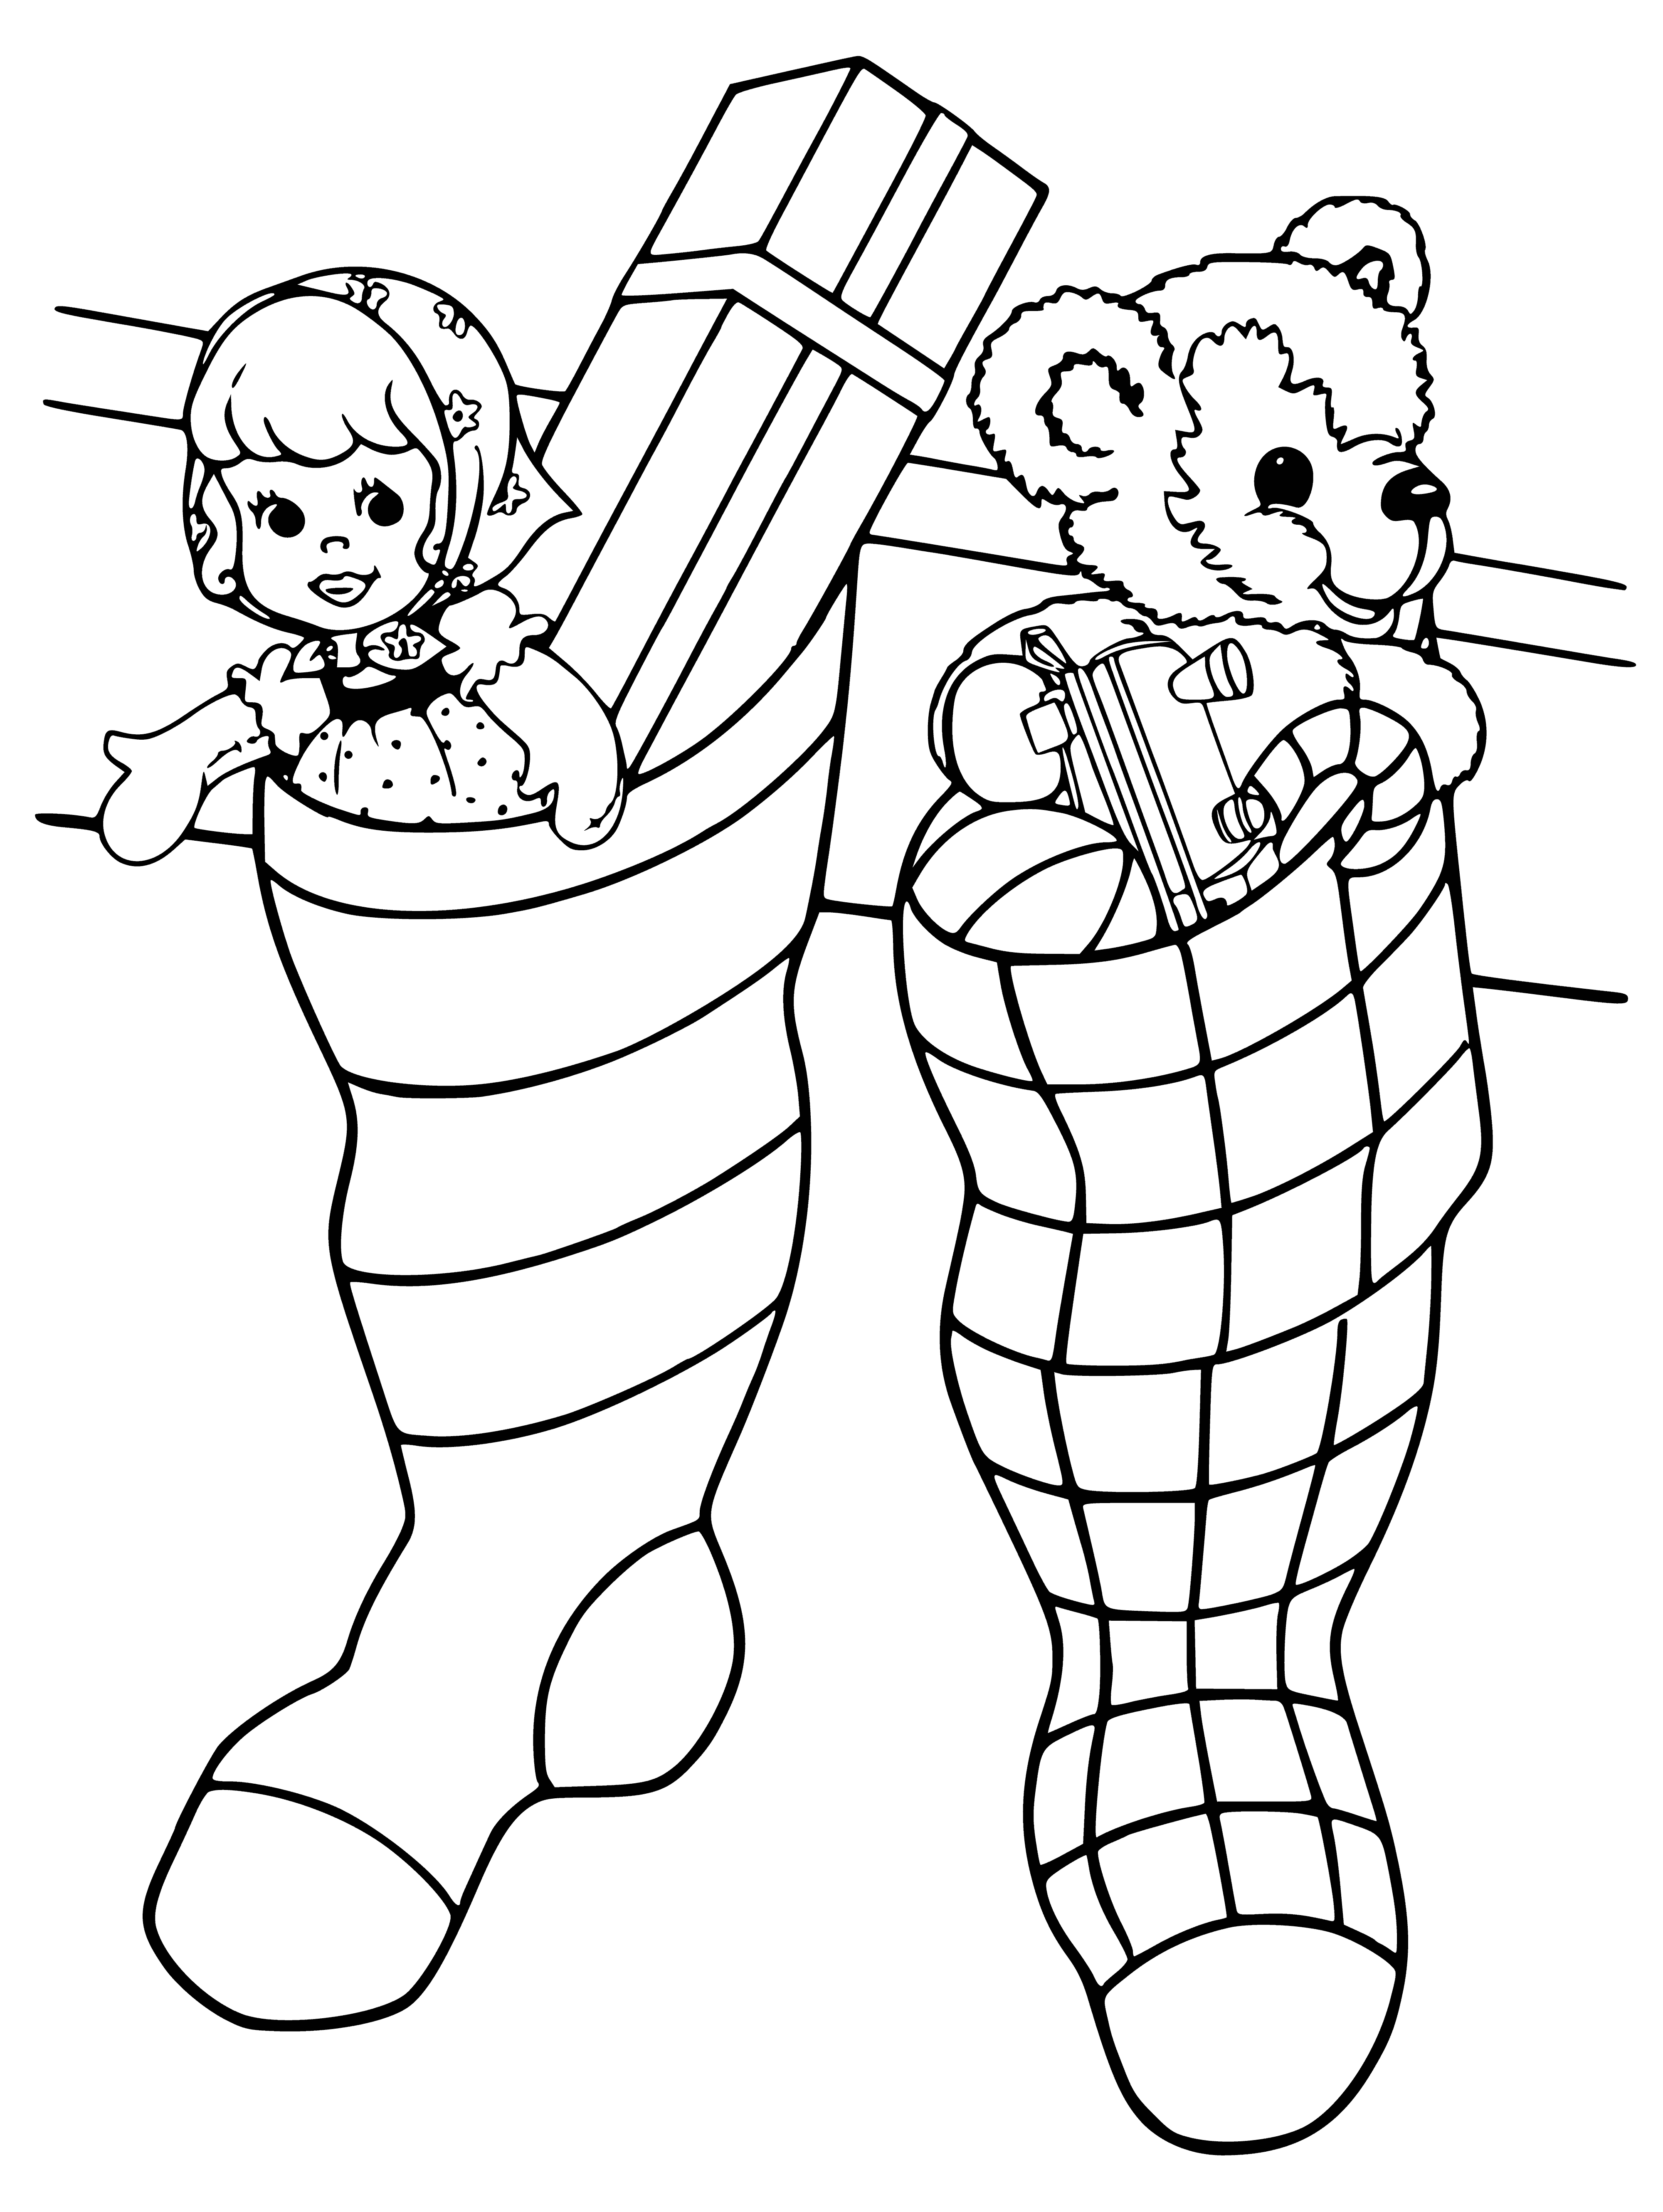 coloring page: Festive red and white socks with snowflakes & candy canes pattern - perfect for the holiday season!